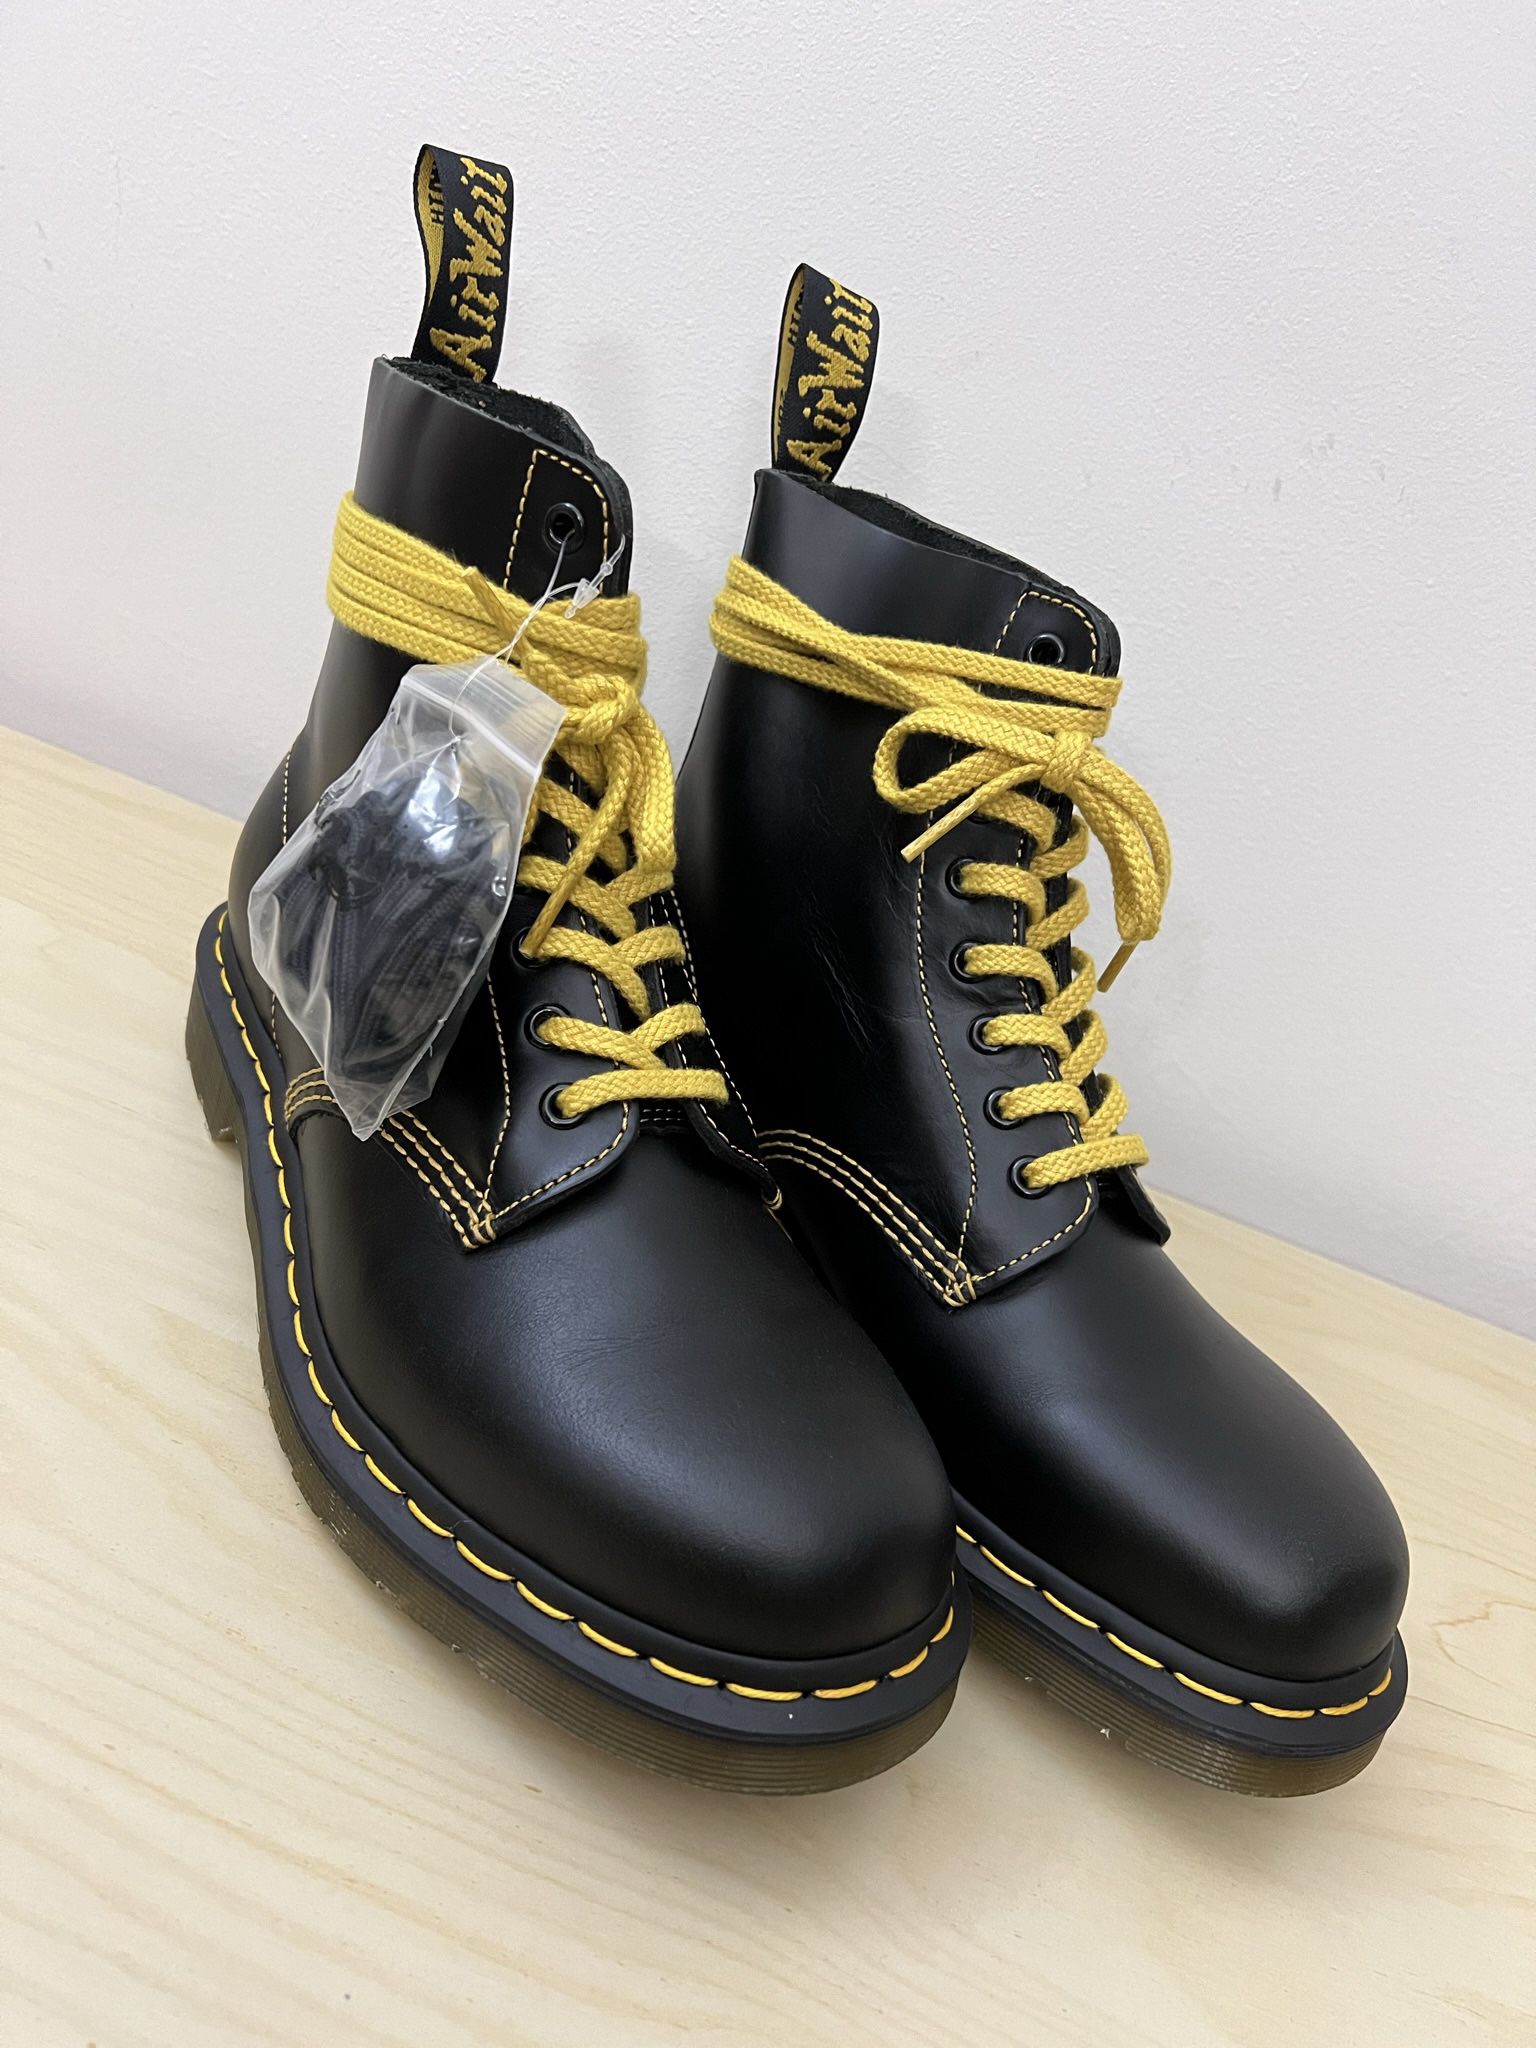 Brand New Dr Martens 1460 Black Pascal Atlas Leather Race Up 8 Eye Boots Mens US 9 Redwing Wolverine Timberland Supreme